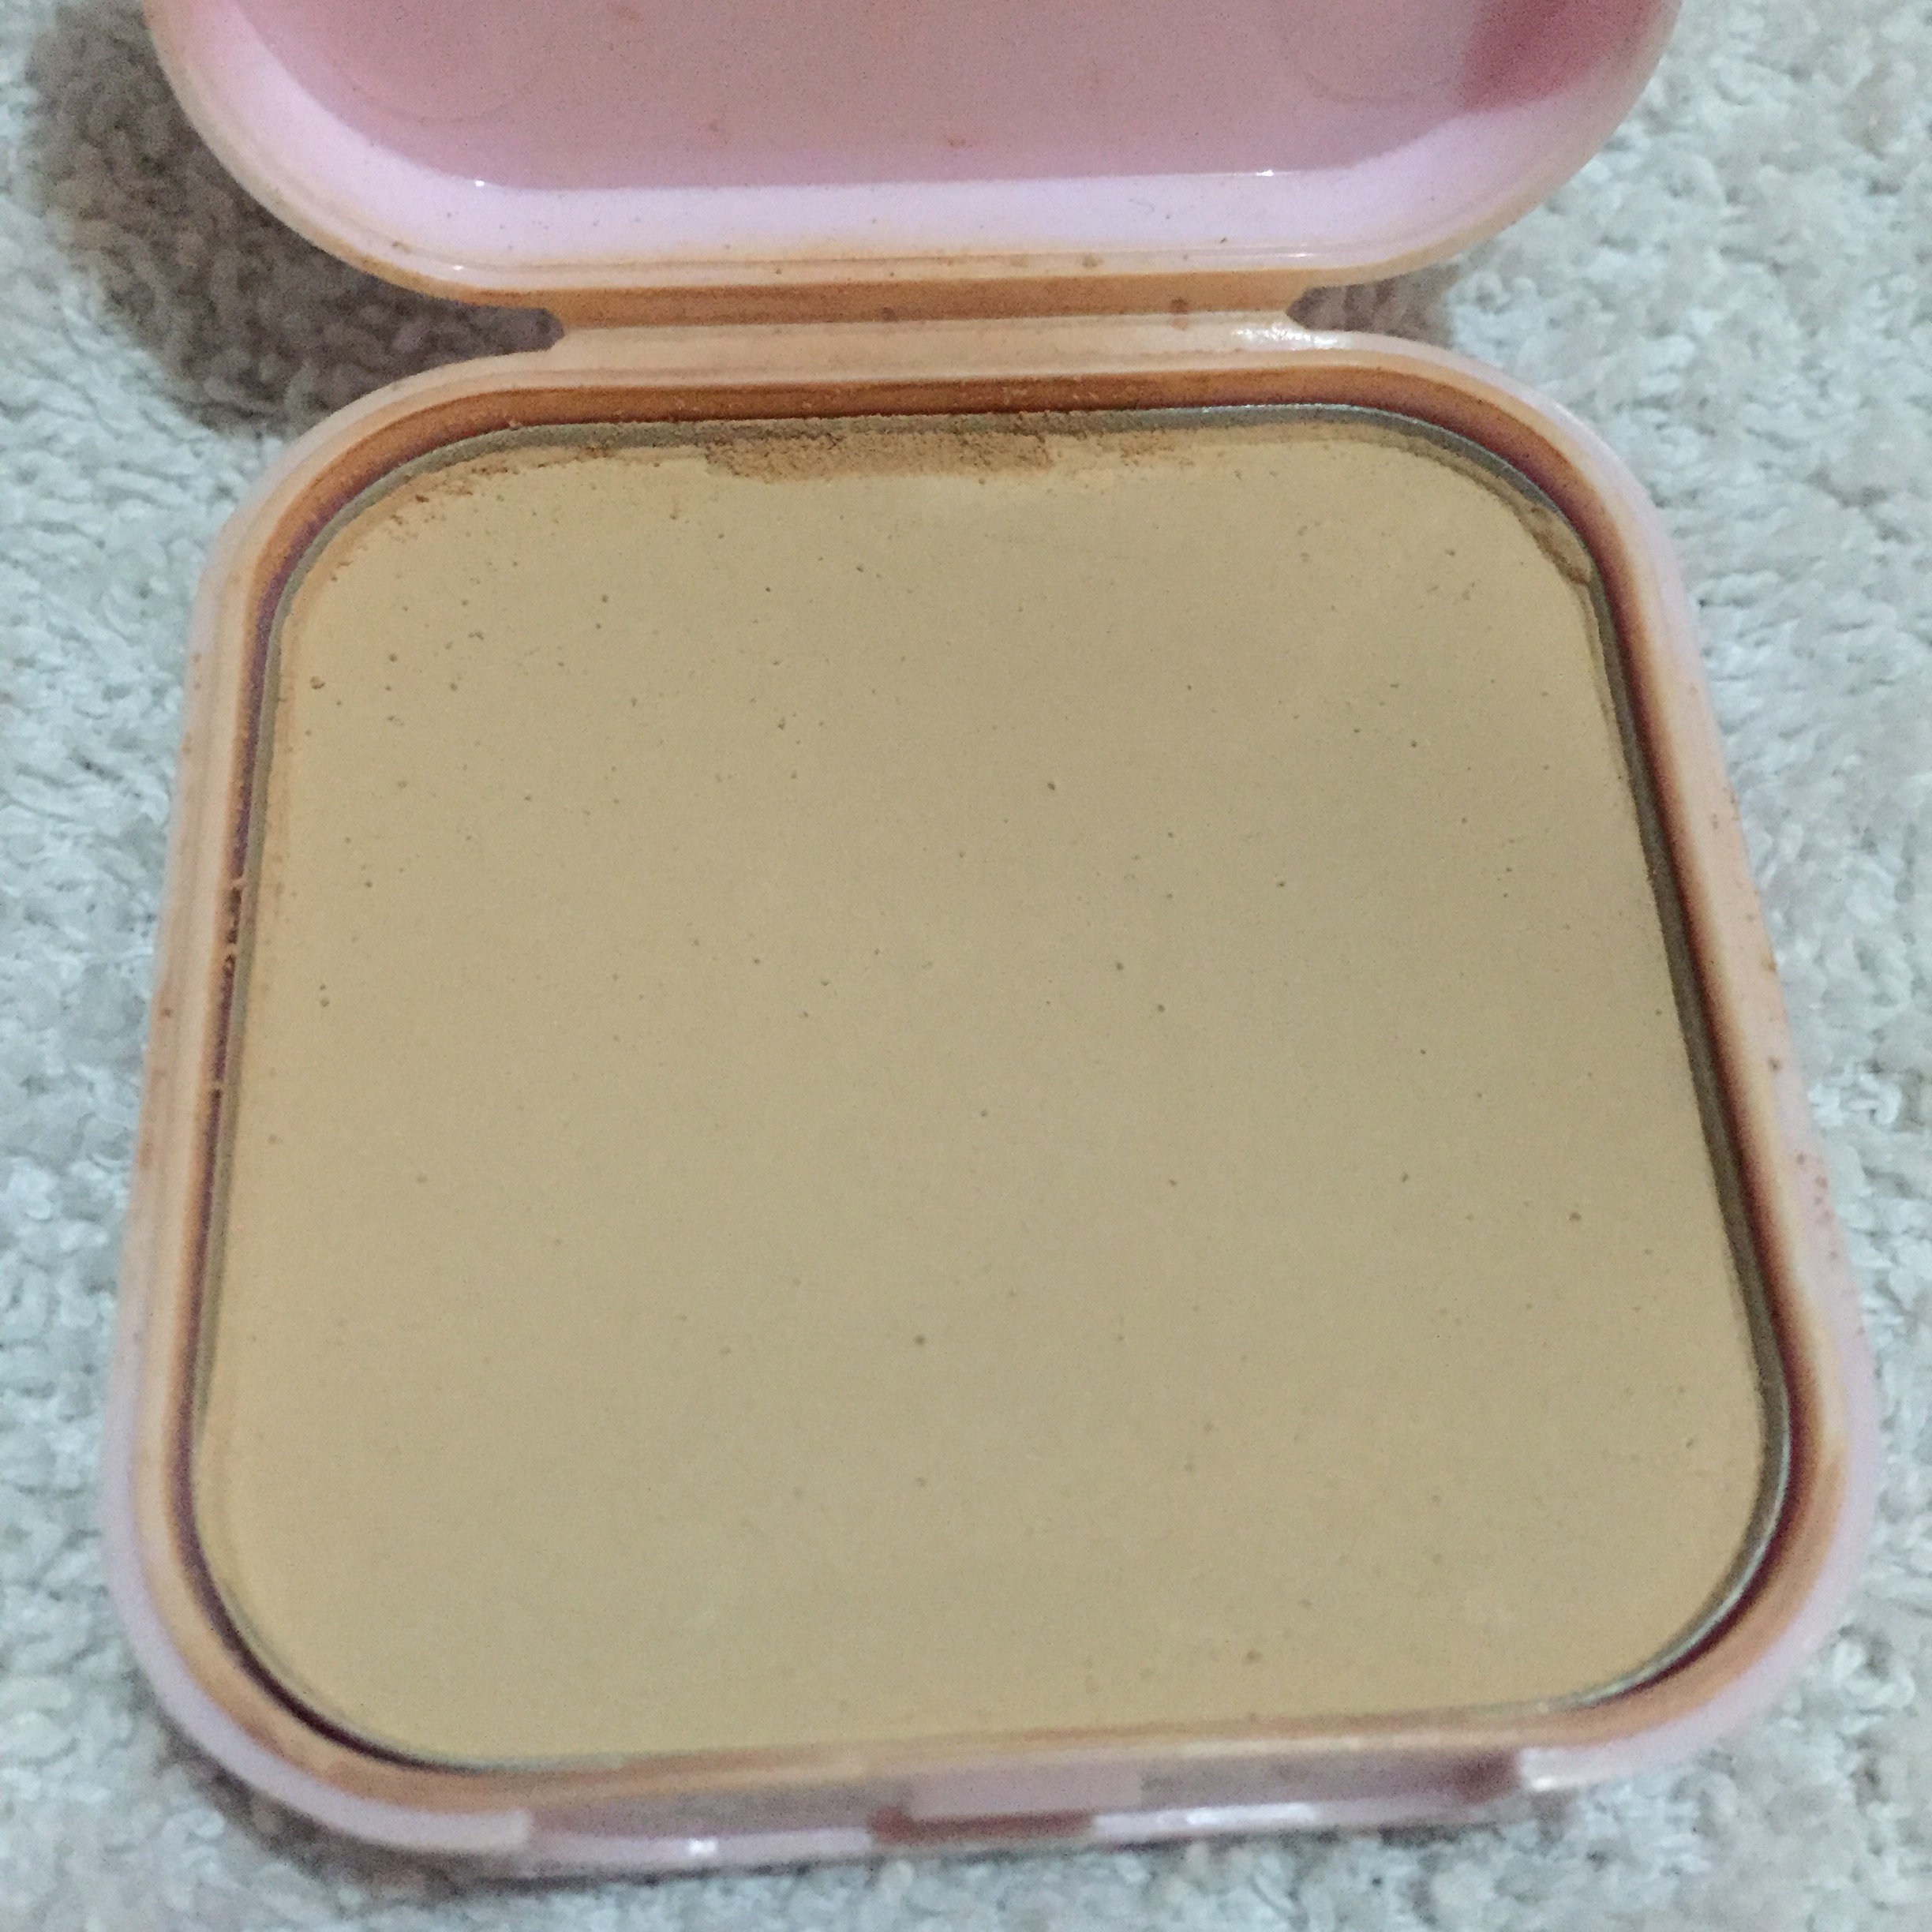 Callas Remix Two-Way Cake Foundation (N02 / Natural Beige)